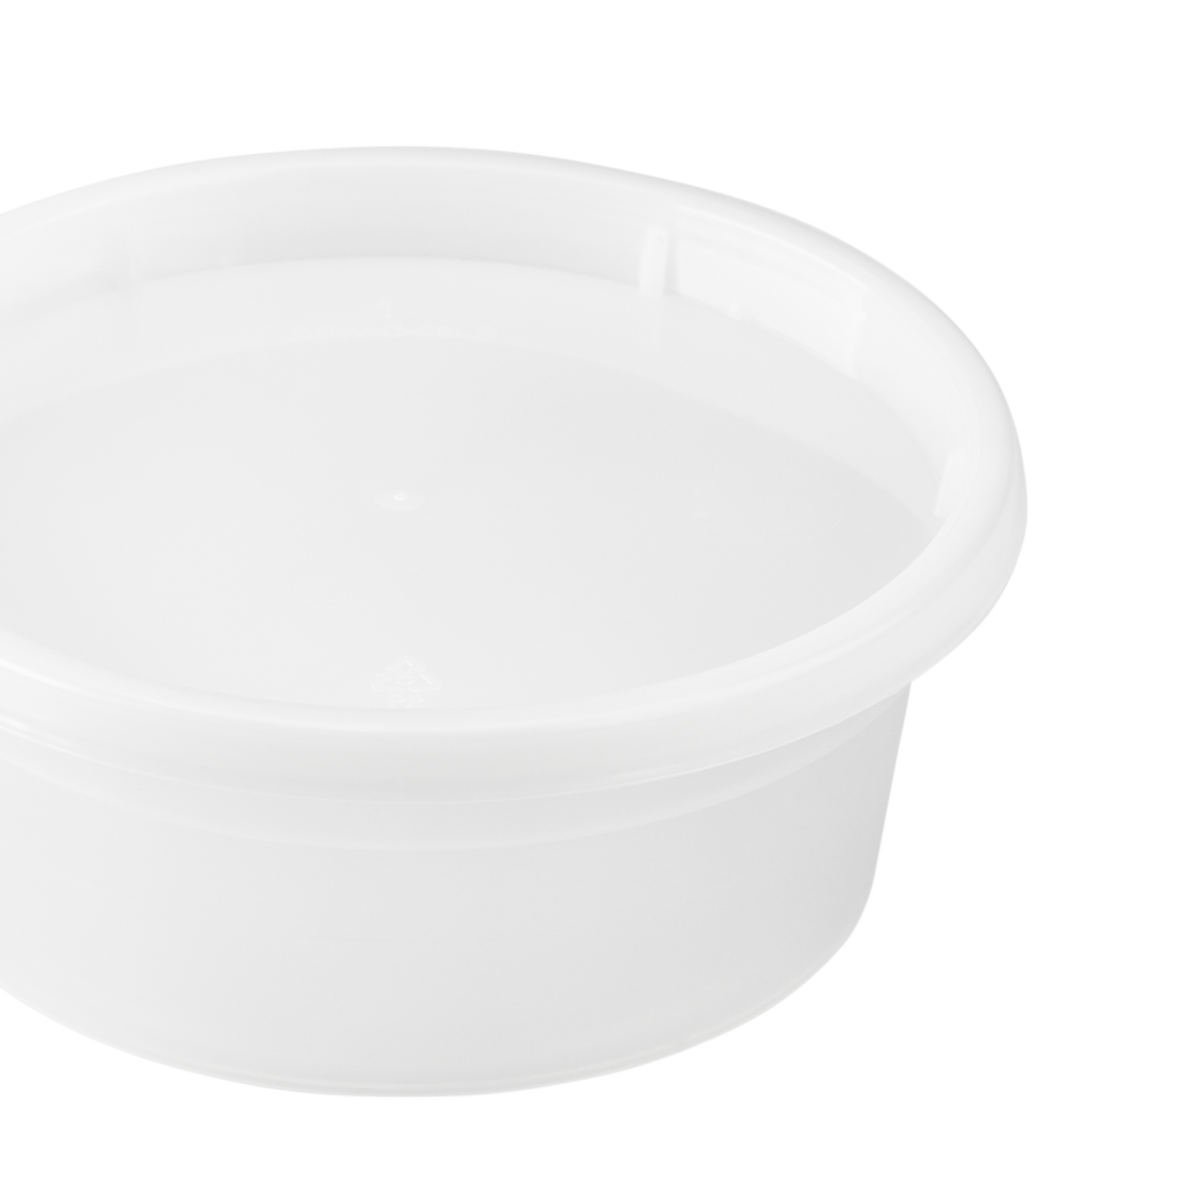 Tripak TD40008 Soup Container Combo 8 Oz, Clear, Injection Molded  Polypropylene, Reusable, with Polypropylene Lid (240 per Case)